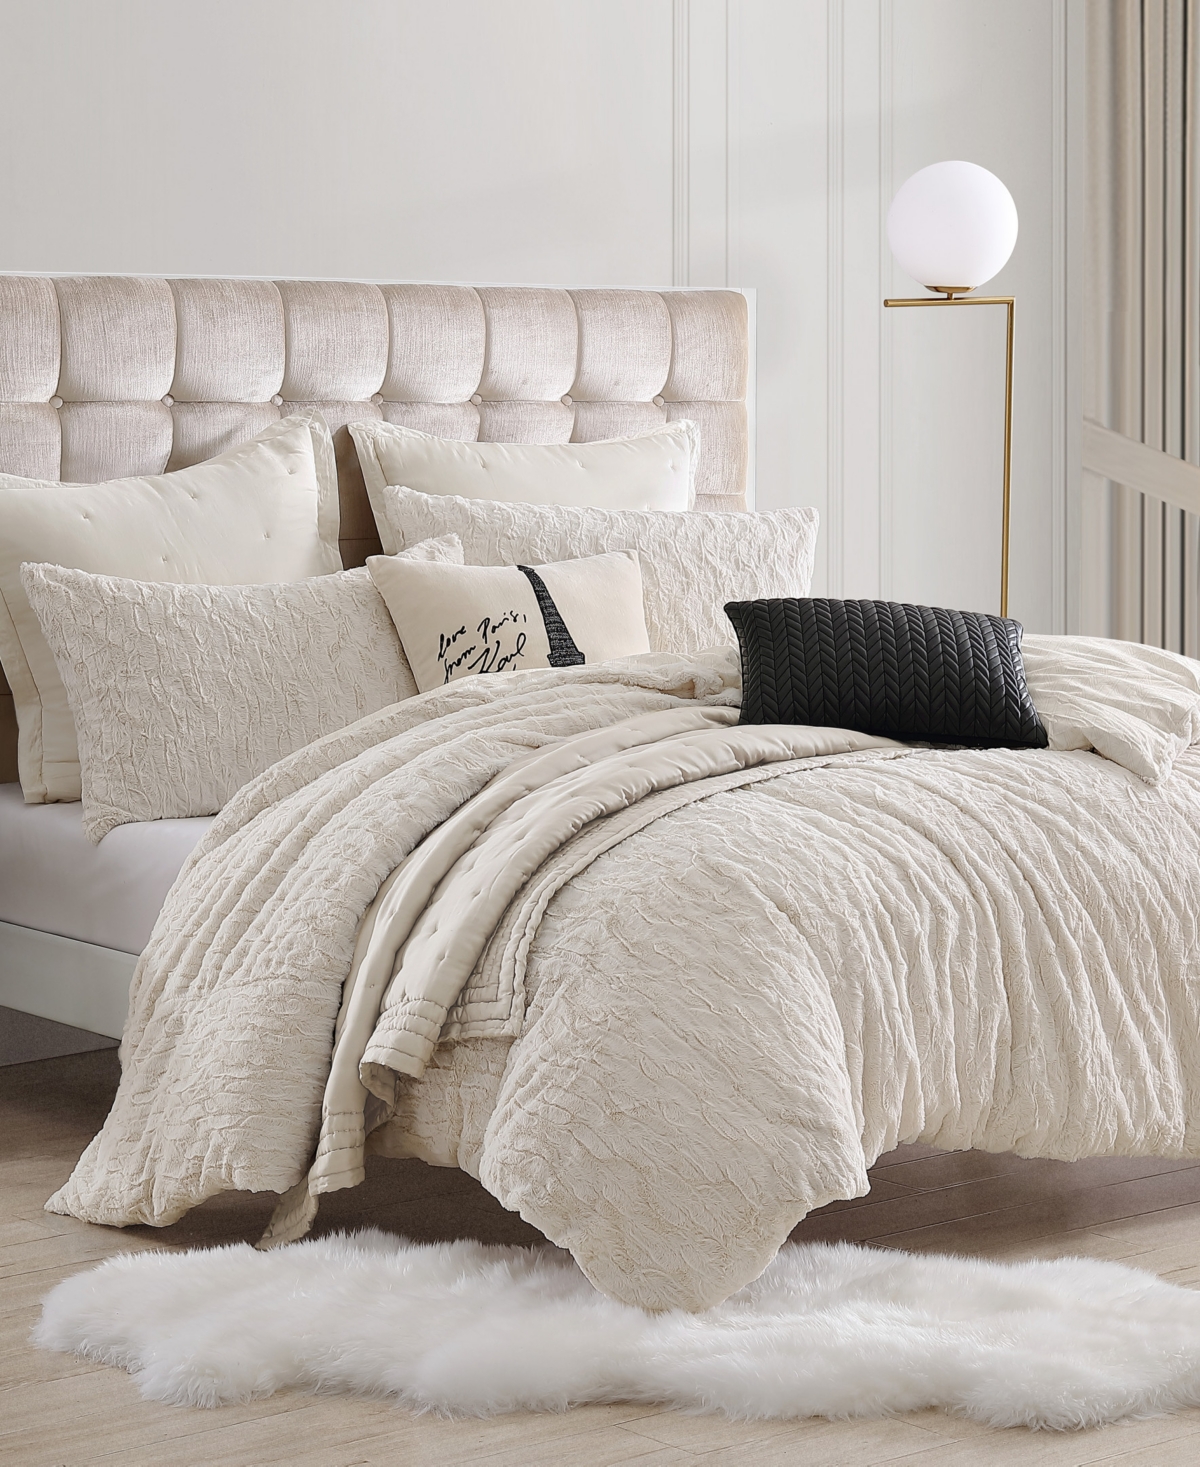 KARL LAGERFELD SOFT AND WARM HEAVENLY 3 PIECE COMFORTER SET, KING